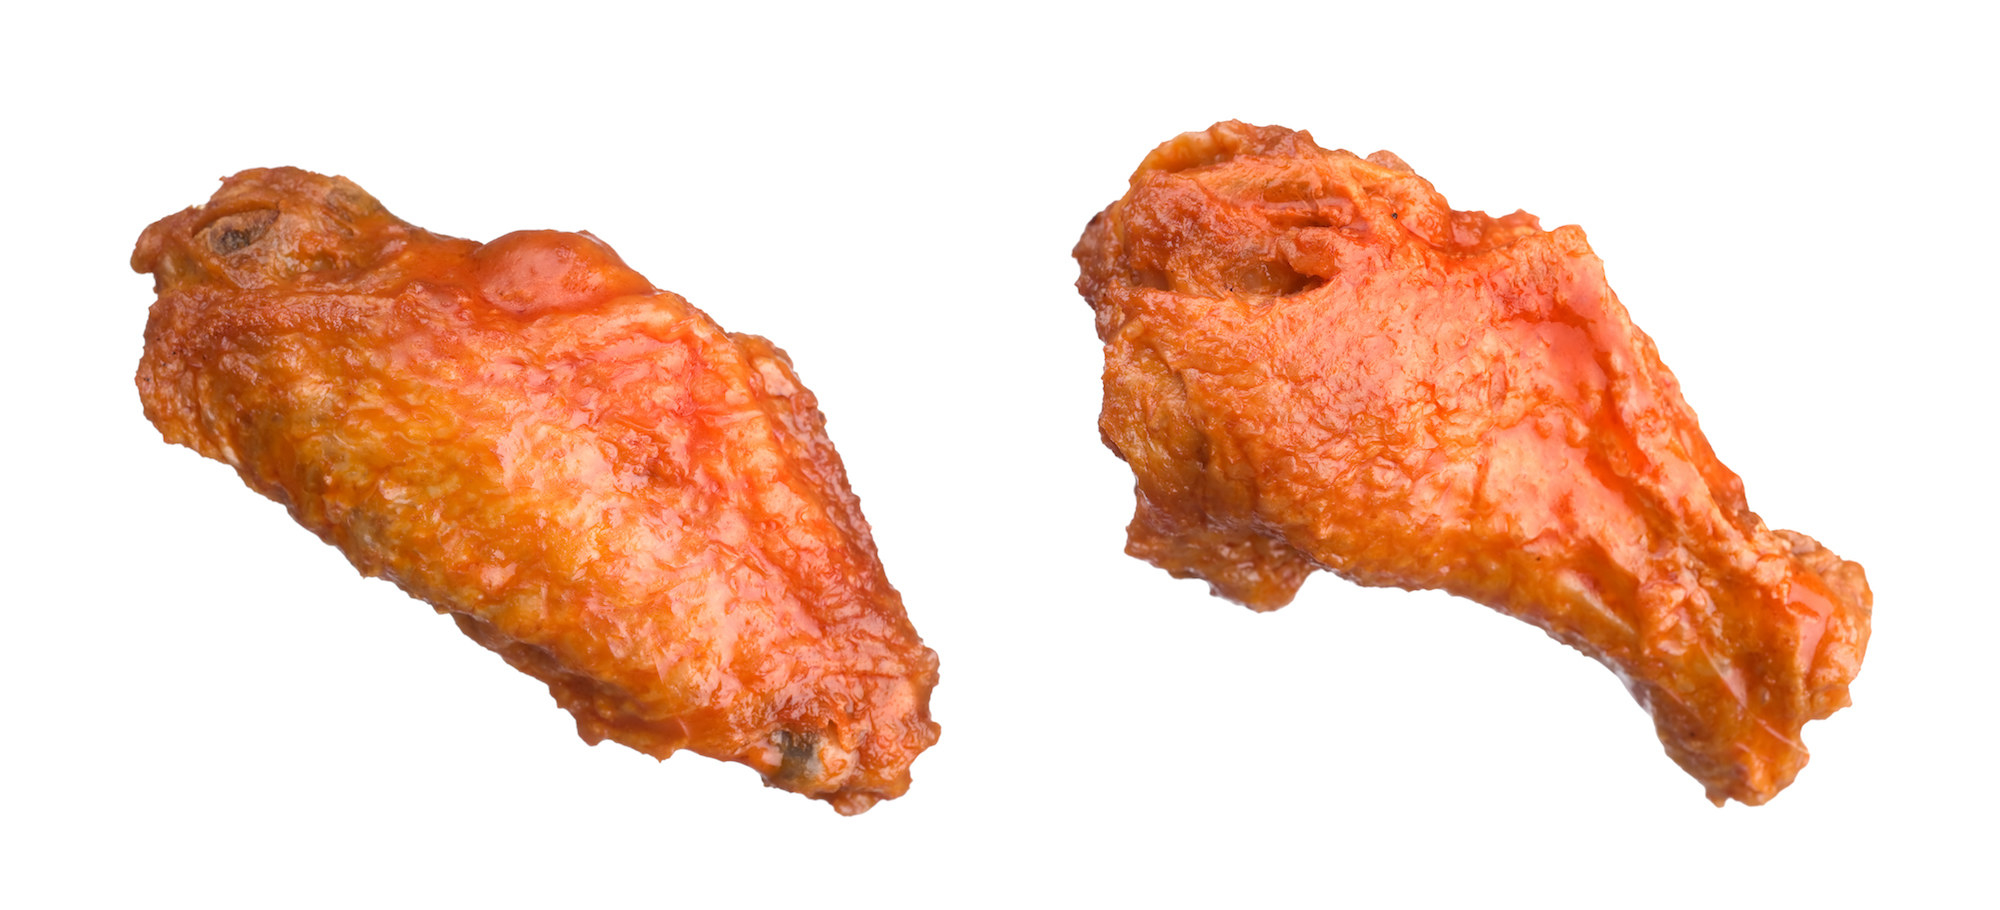 The many different types of chicken wings